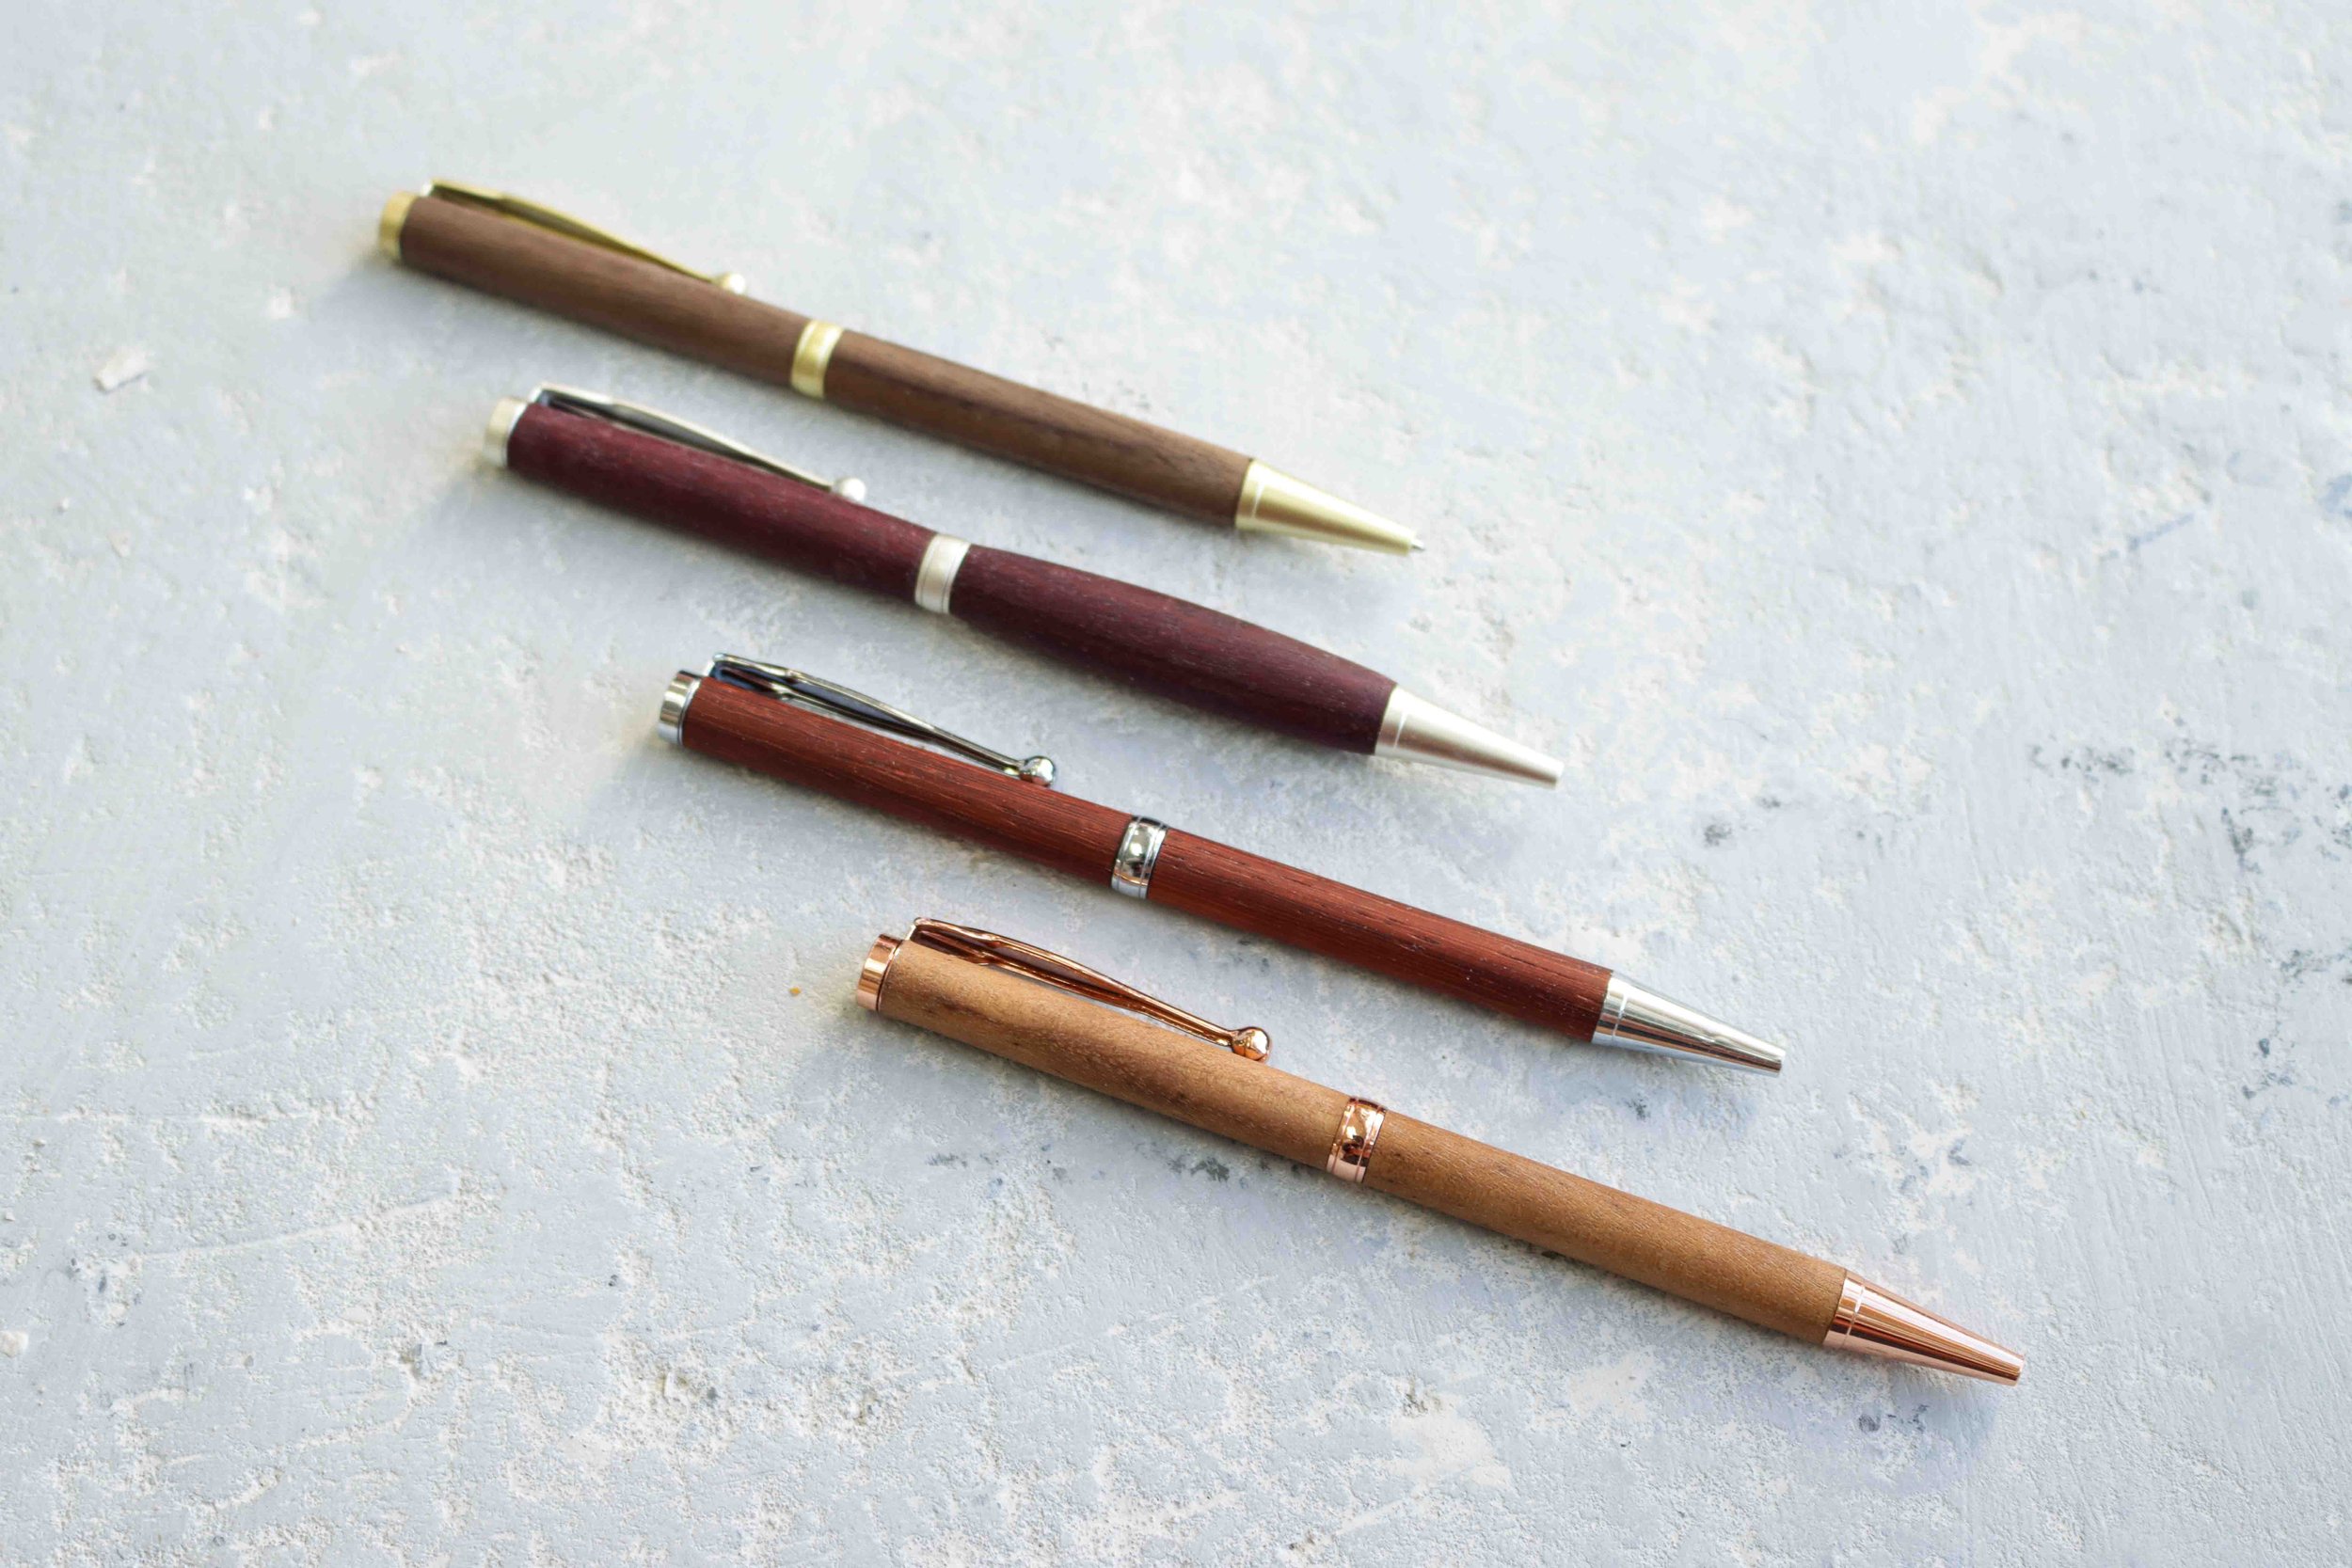 Wooden pencils turned on the lathe (Copy) (Copy) (Copy) (Copy) (Copy) (Copy) (Copy) (Copy) (Copy) (Copy)